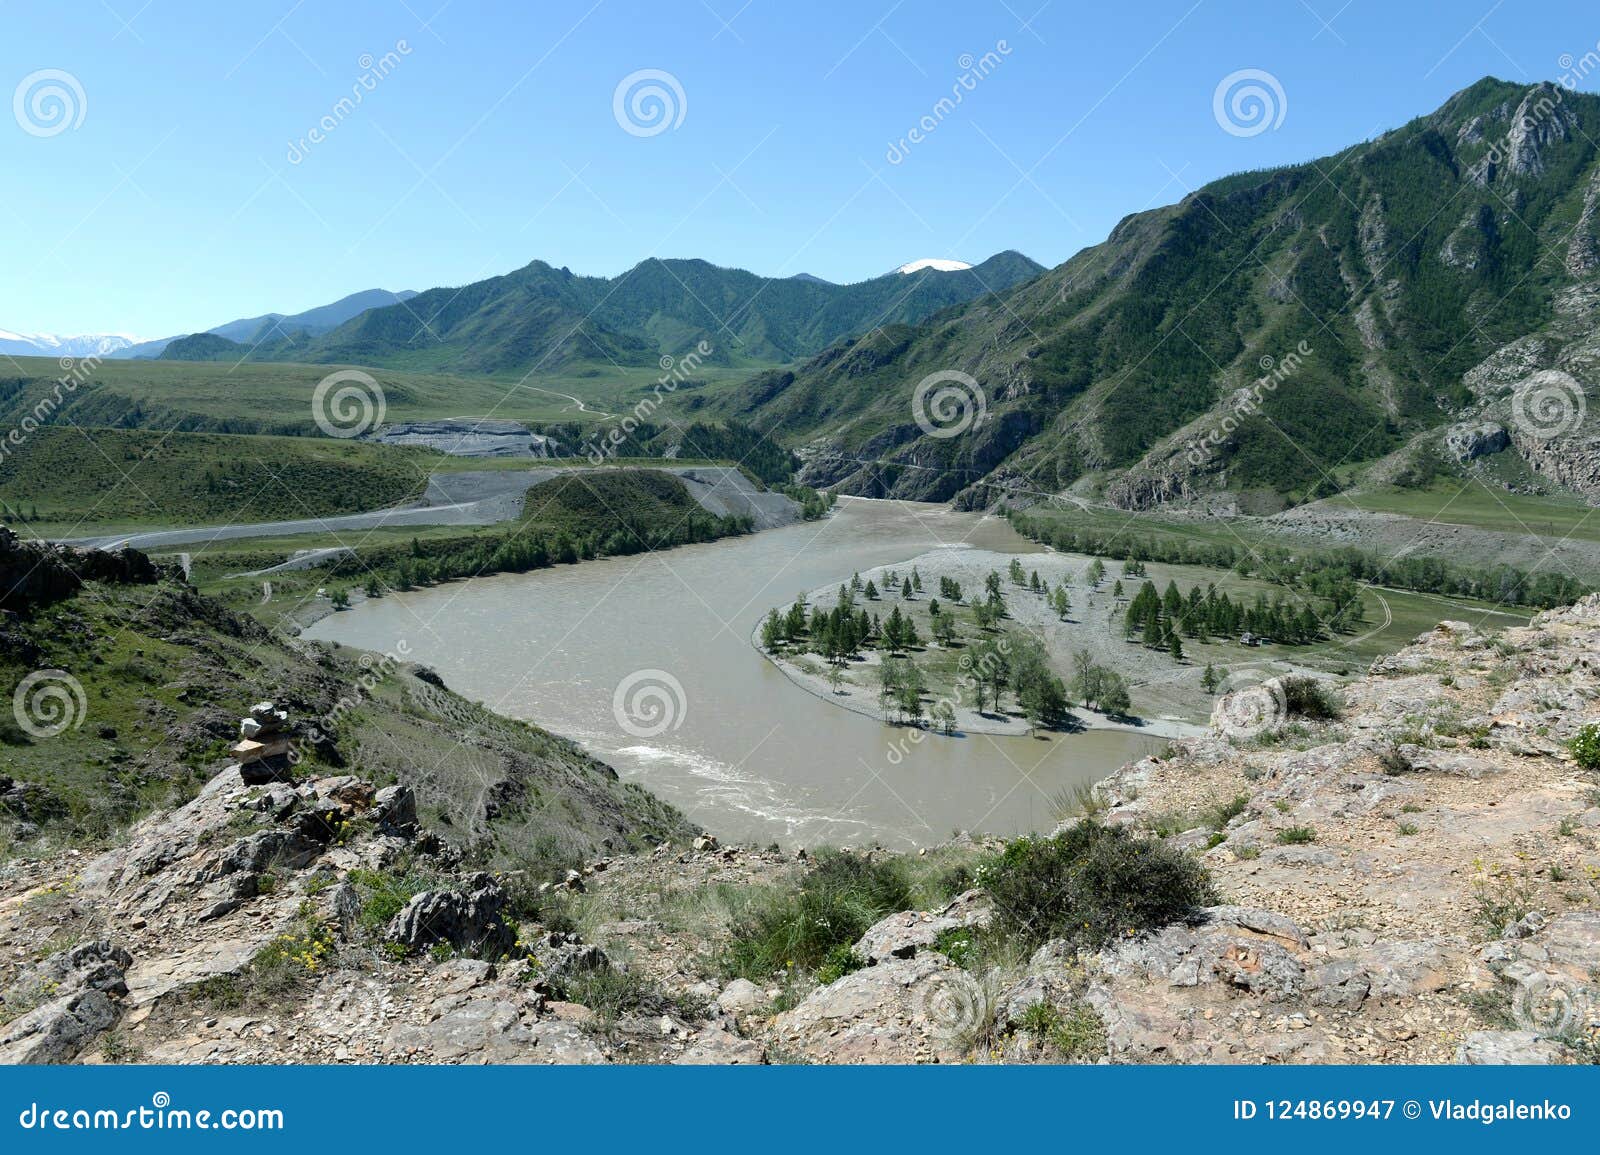 Place Of The Confluence Of The Rivers Katun And Chuya In Altai